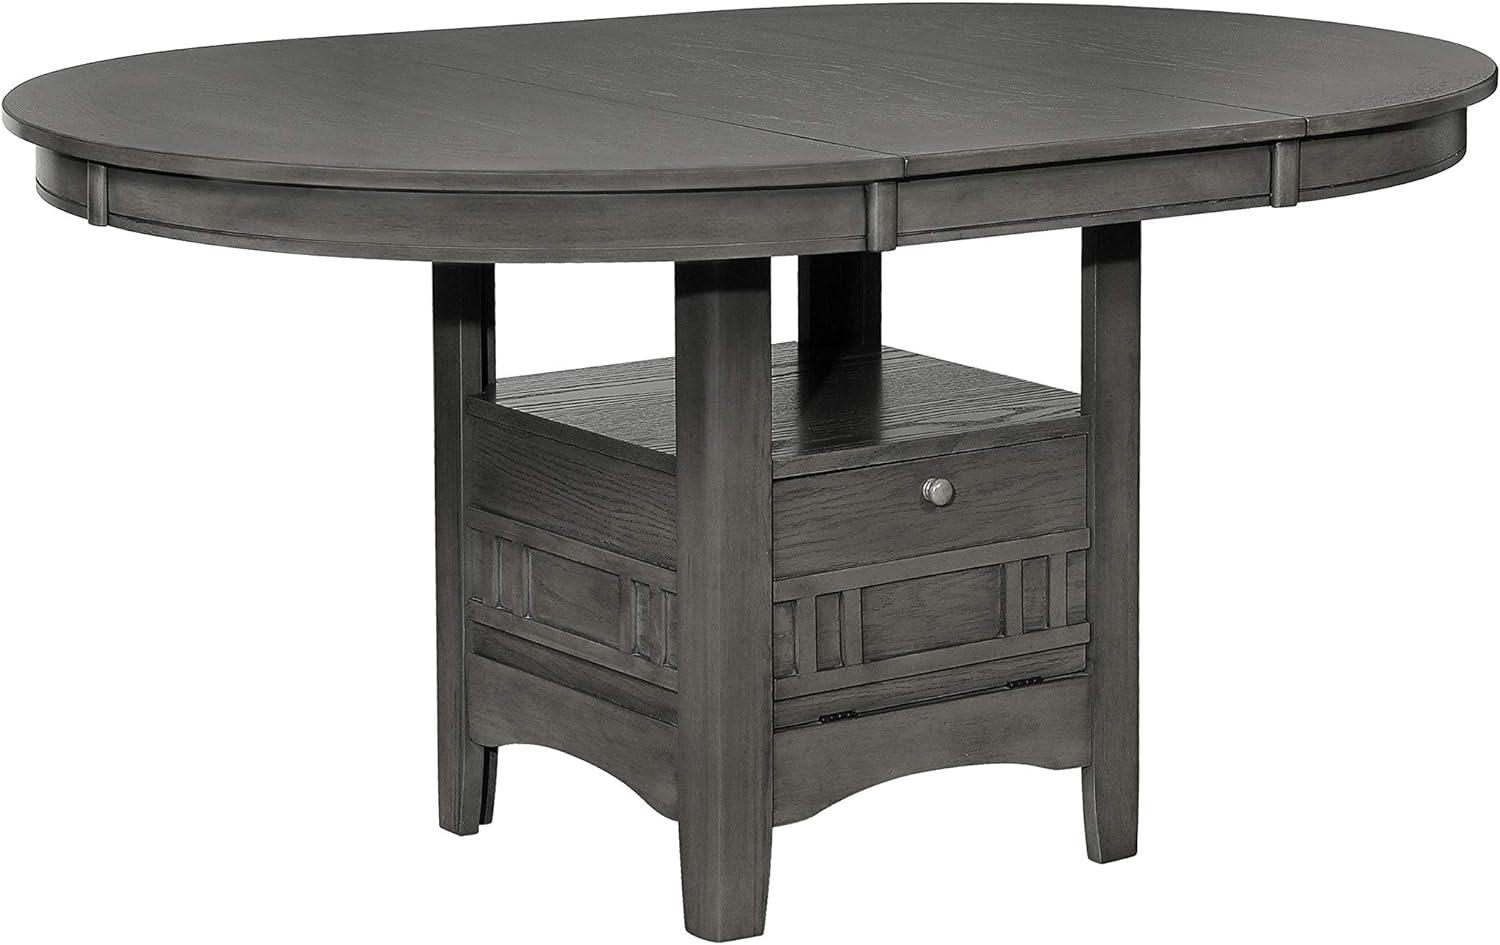 Transitional Medium Grey Extendable Oval Dining Table with Storage